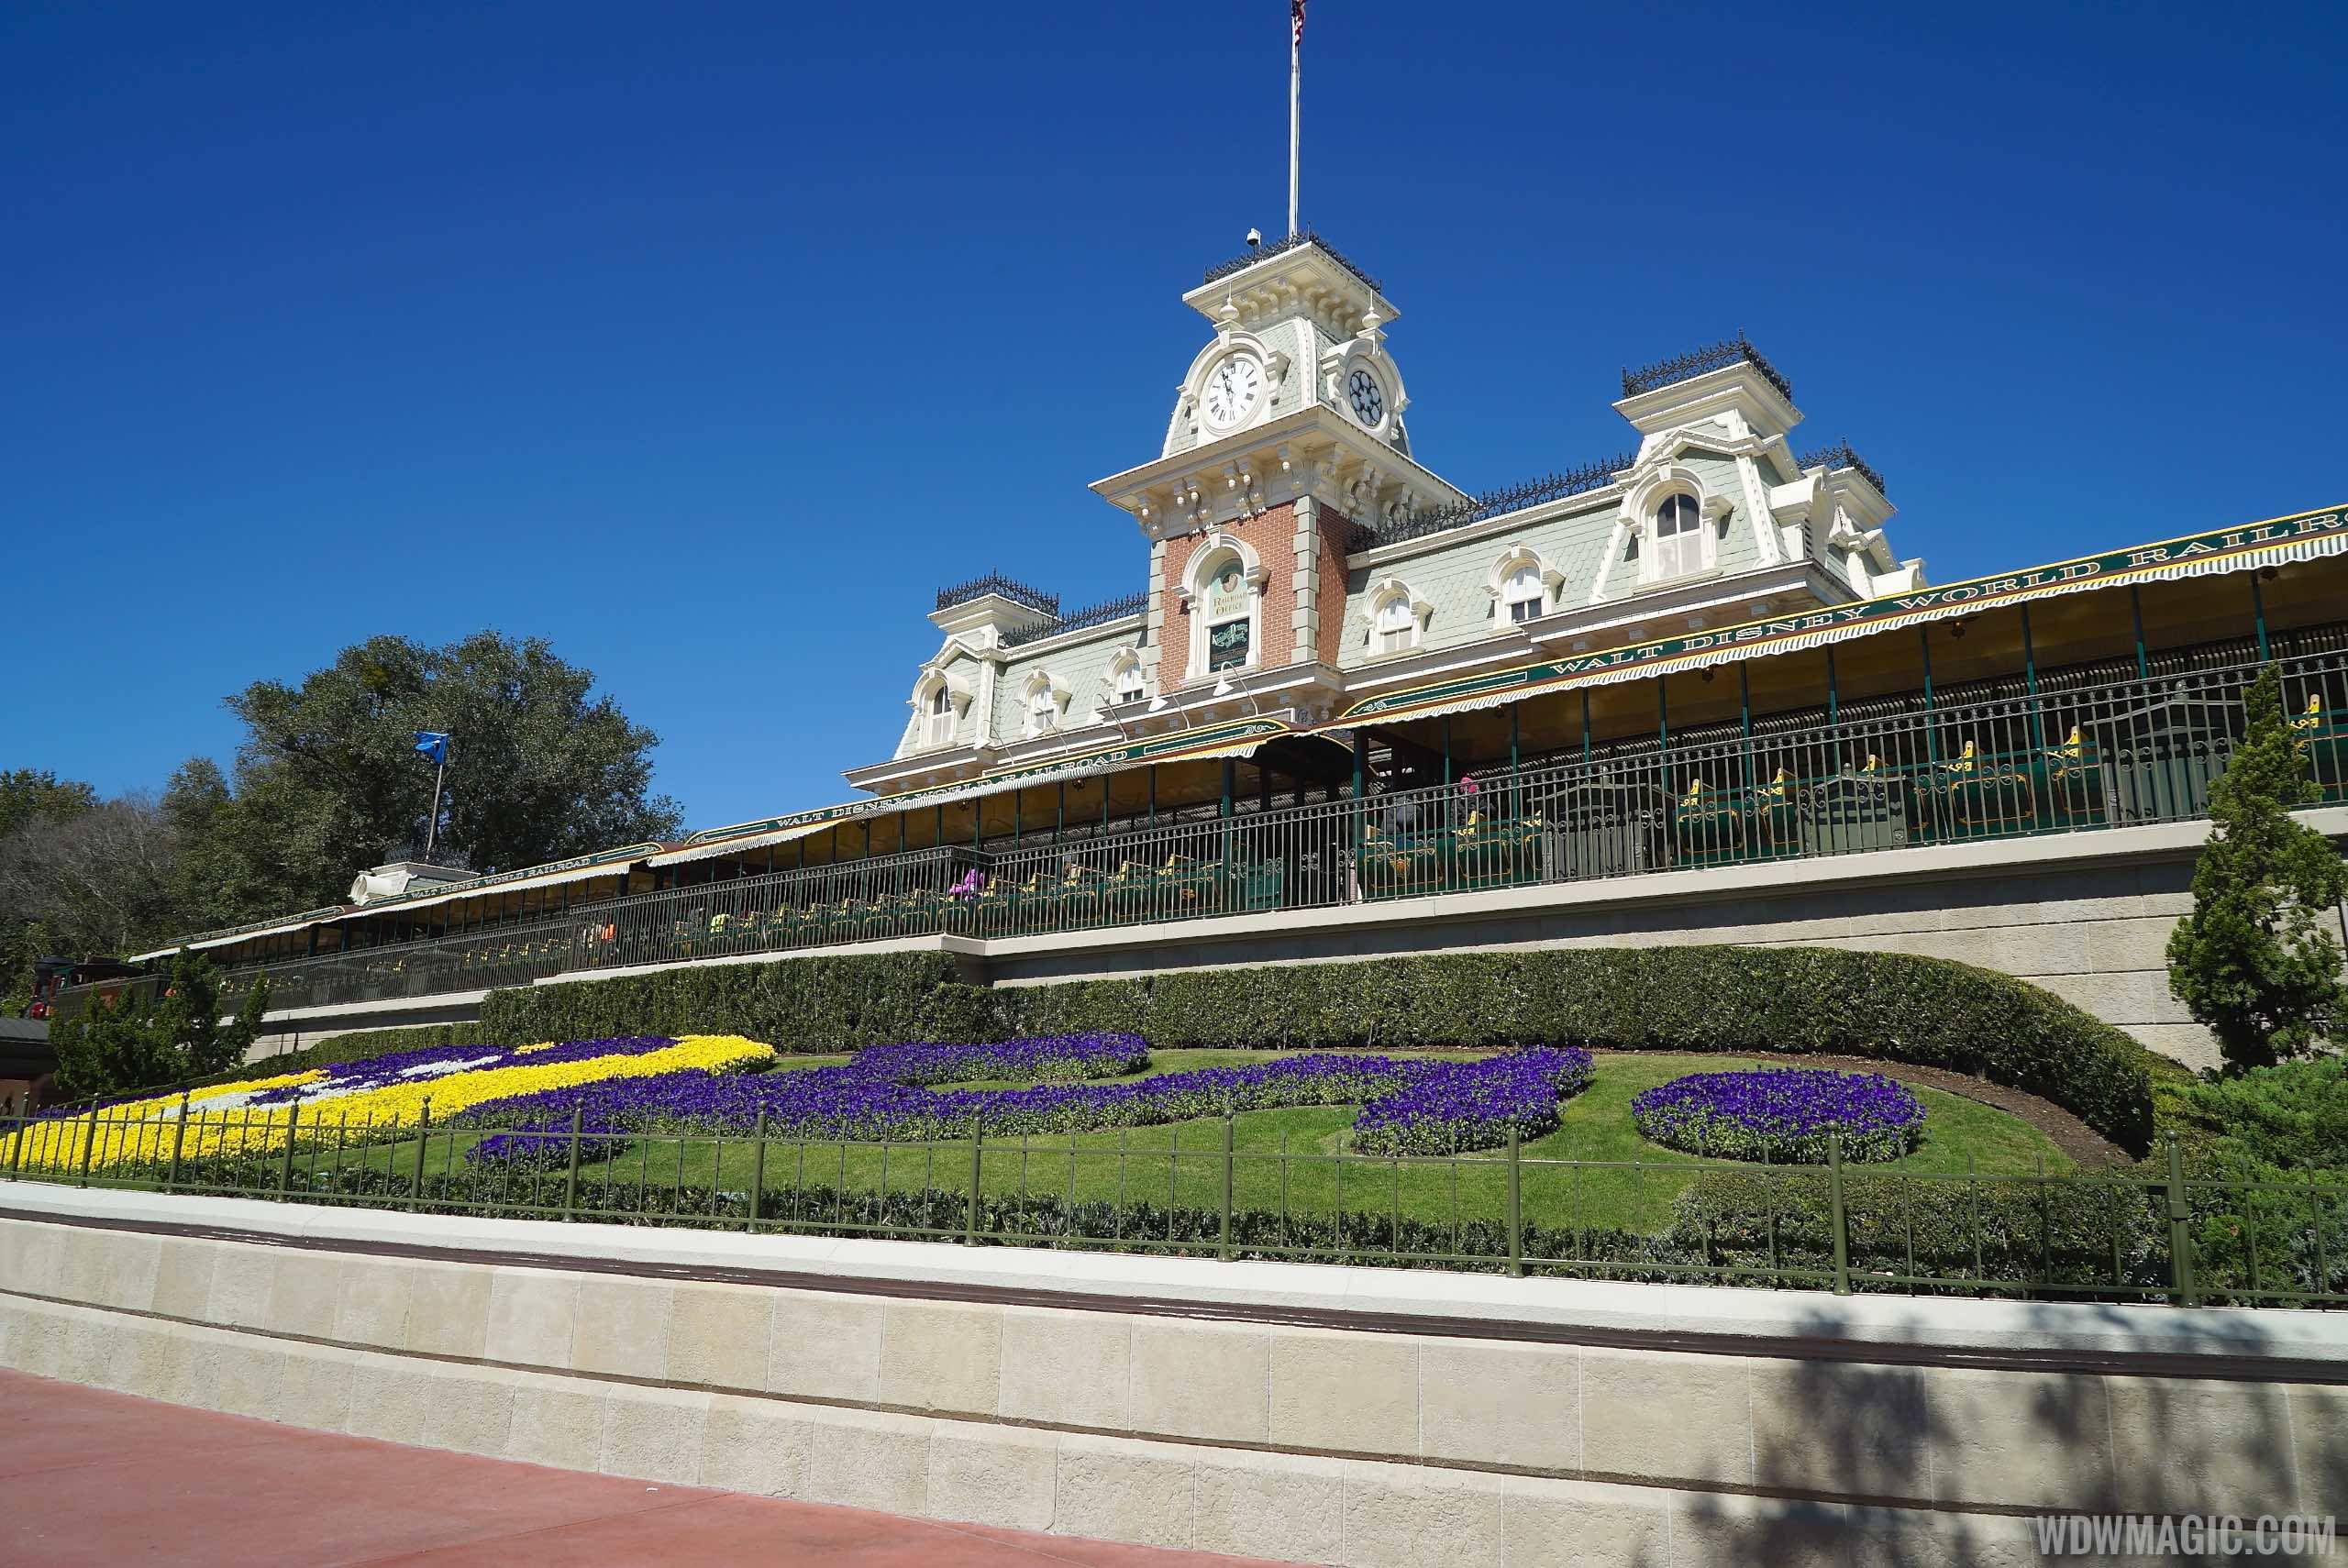 PHOTOS - New railings installed in-front of the Main Street Station at the Magic Kingdom's main entrance